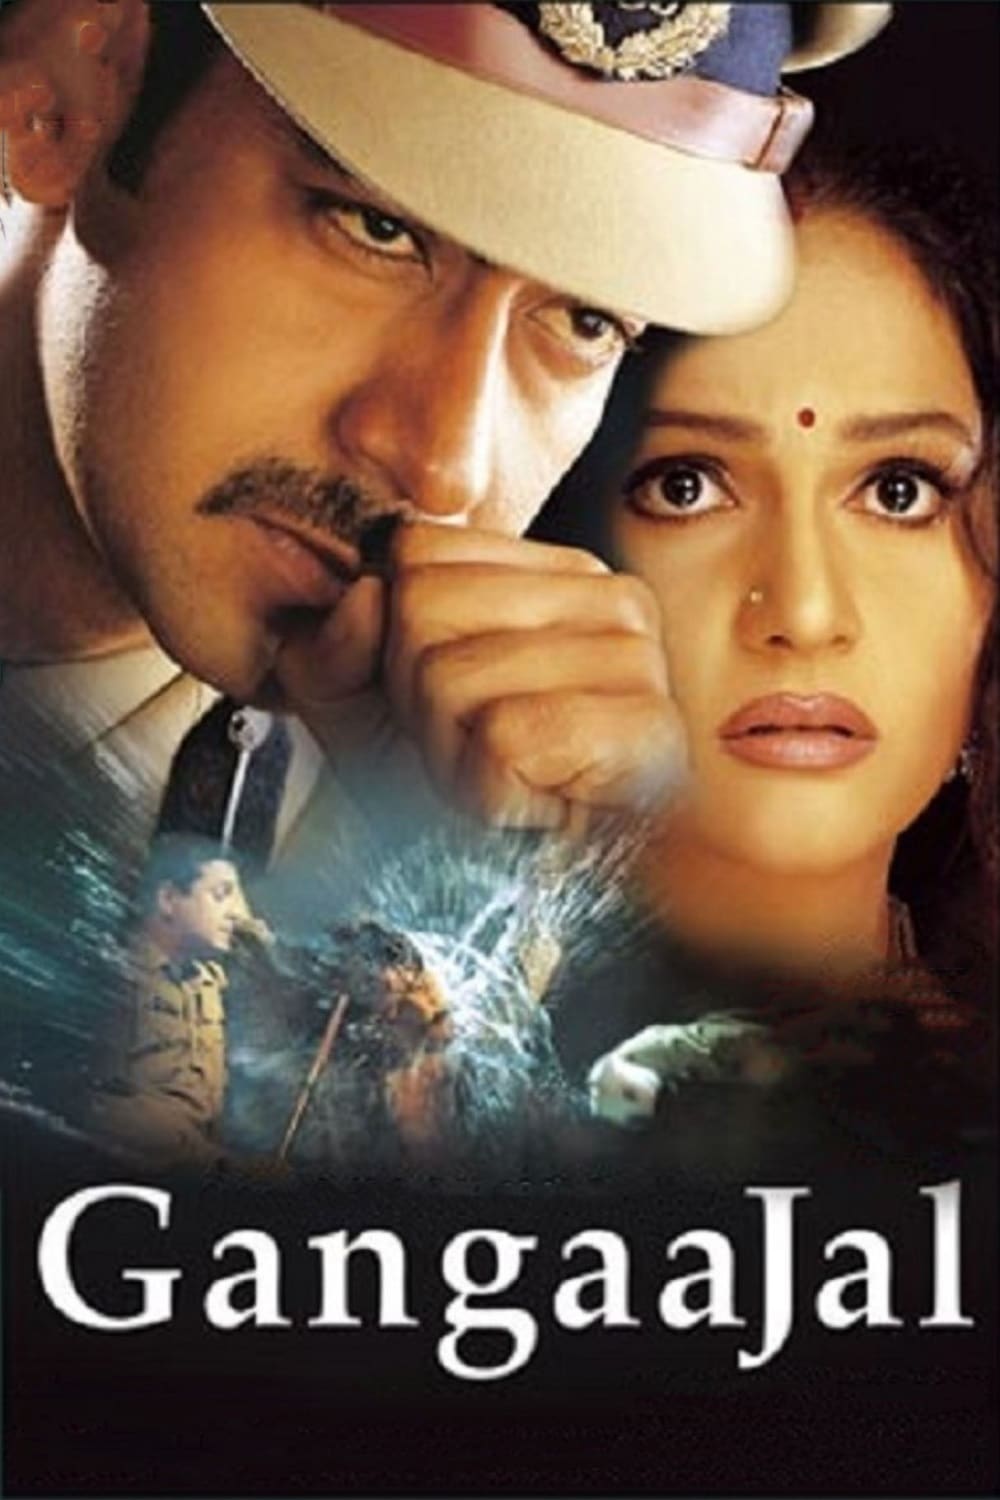 Poster for the movie "Gangaajal"